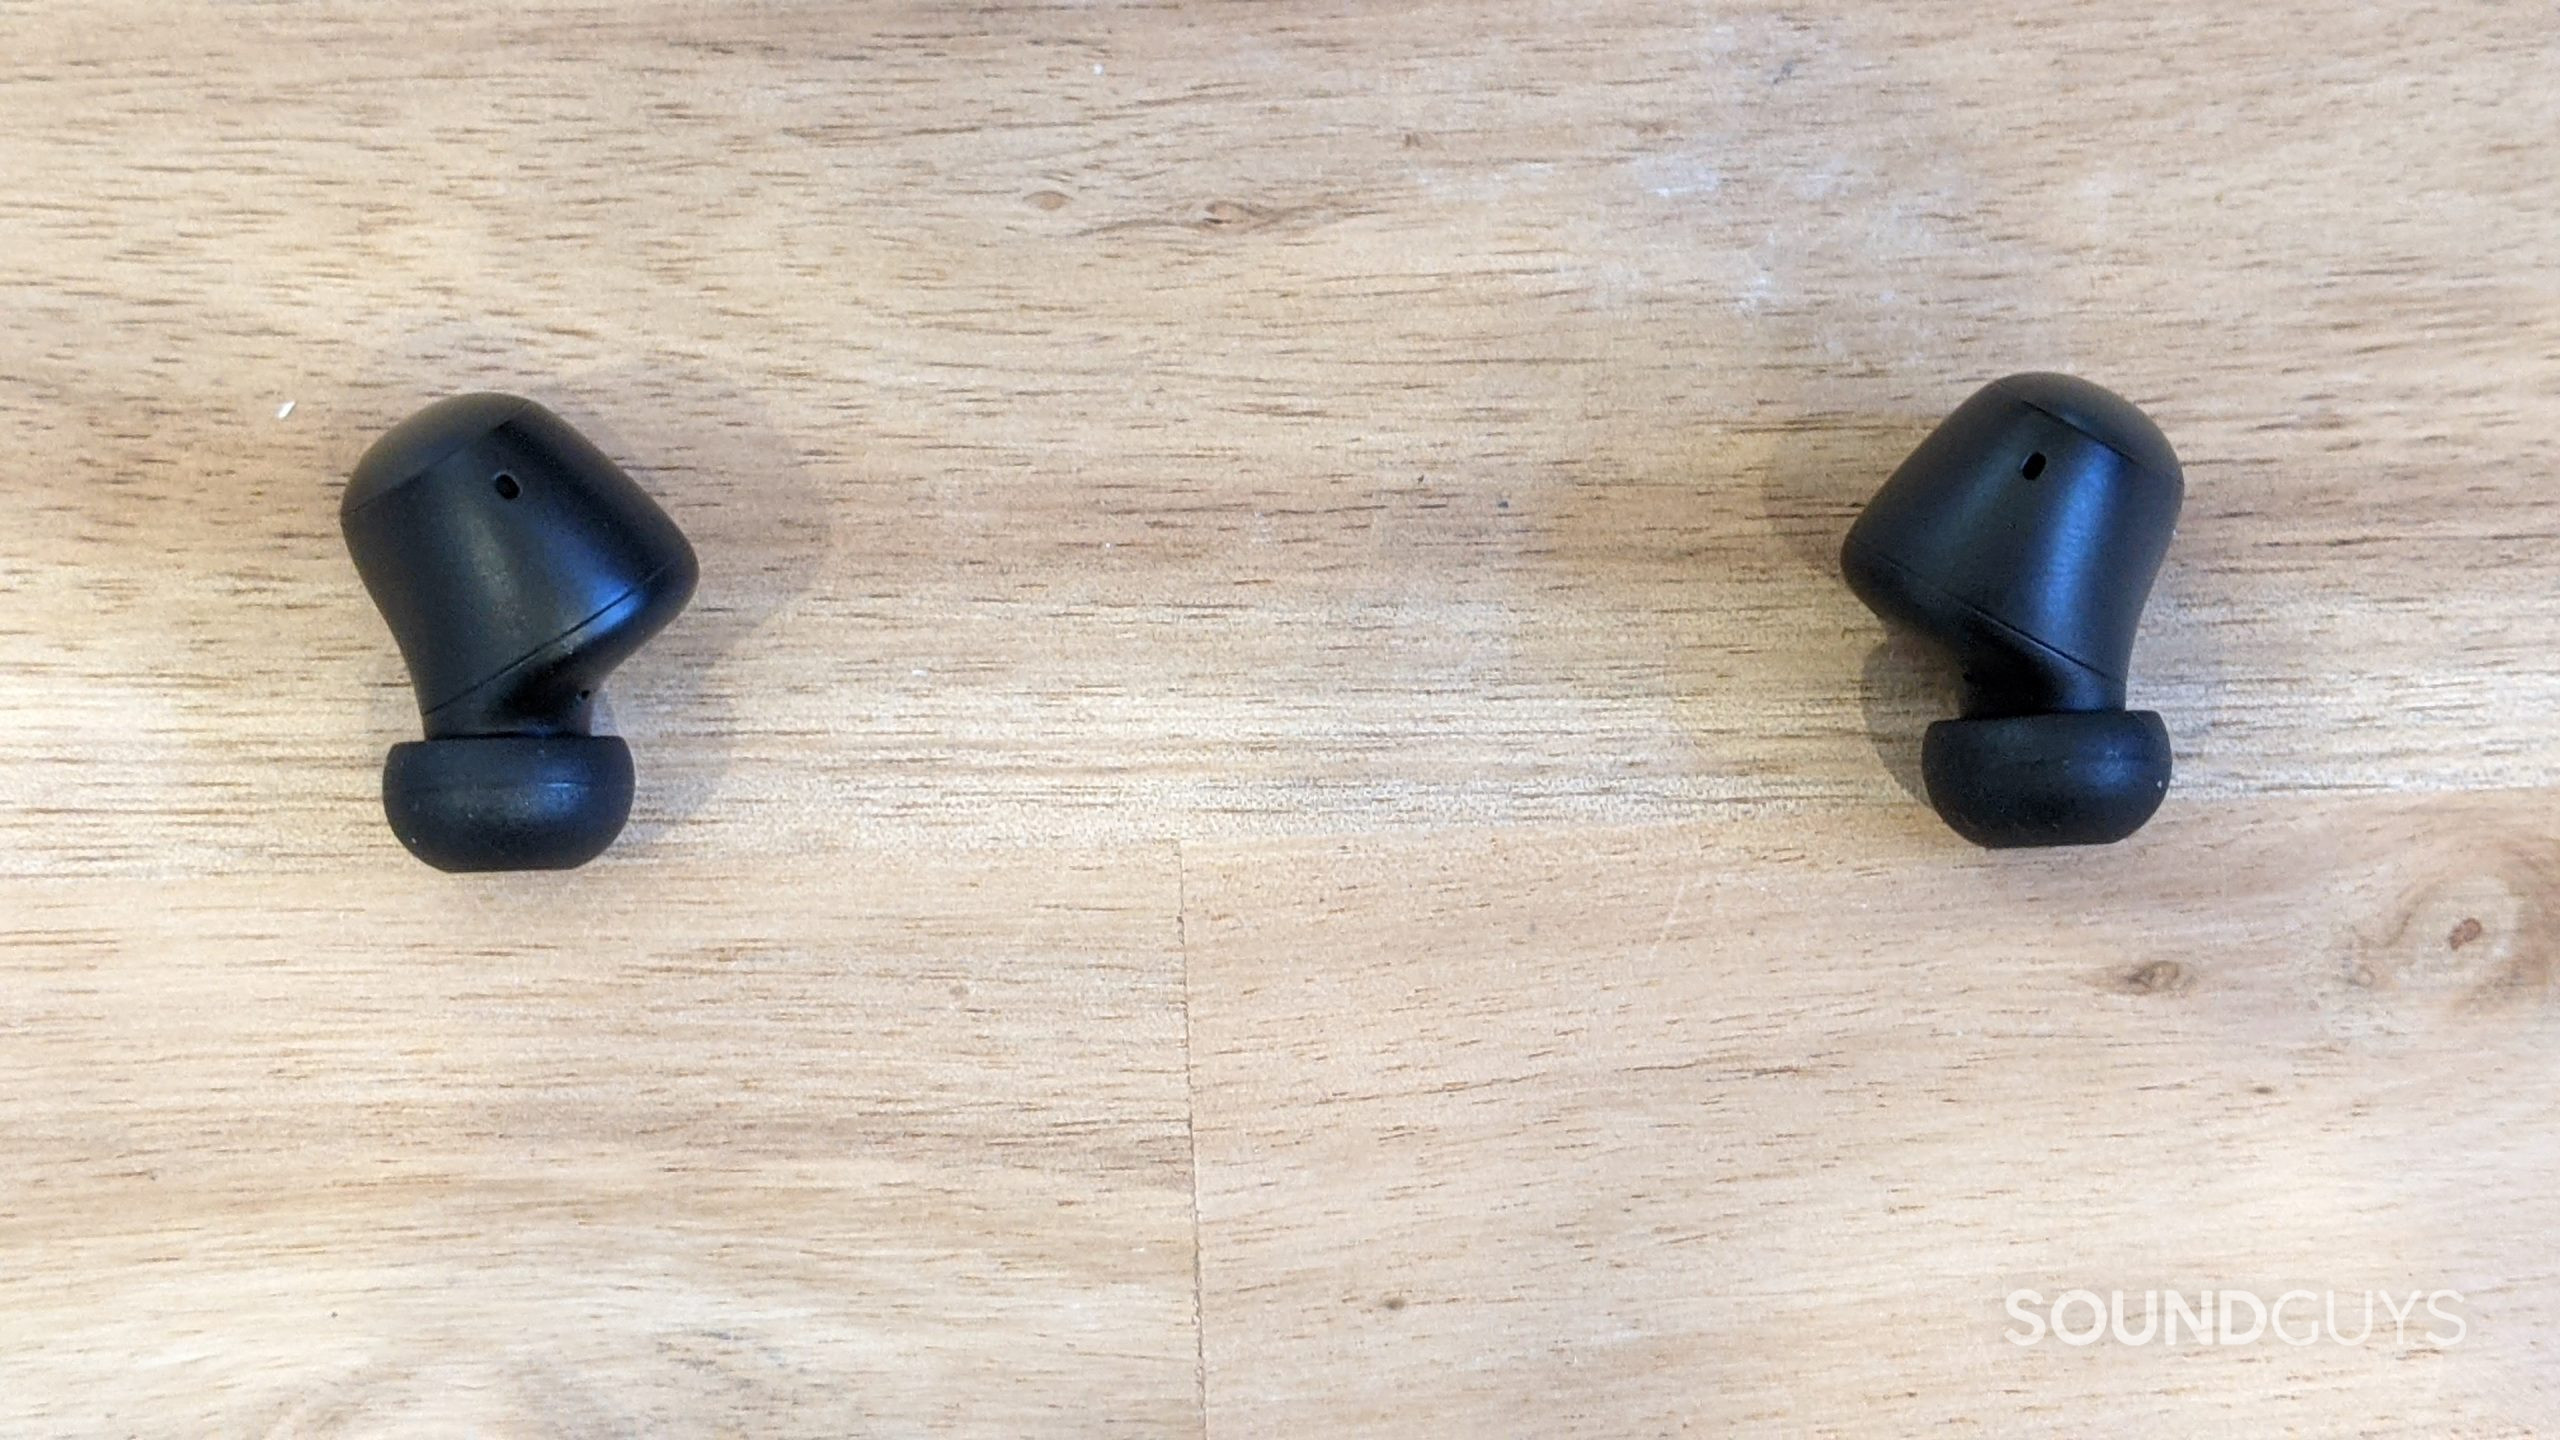 The 1MORE ColorBuds 2 earbuds lying on table out of their case.